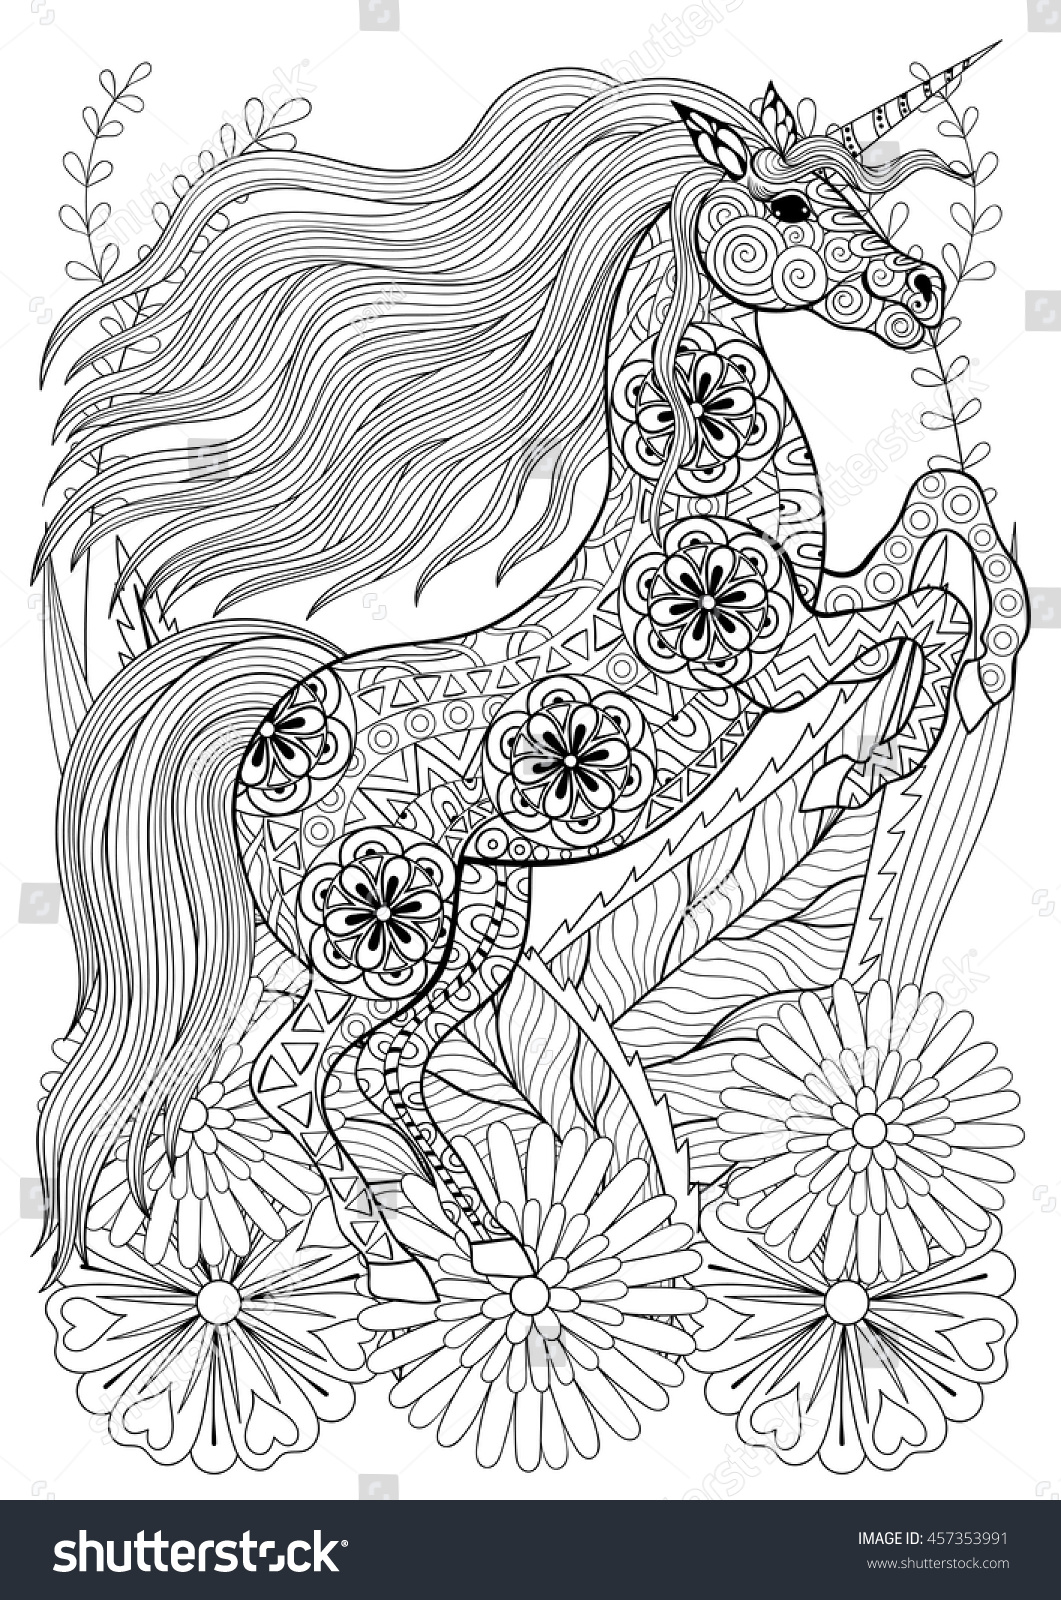 4400 Unicorn Coloring Pages With Flowers Pictures